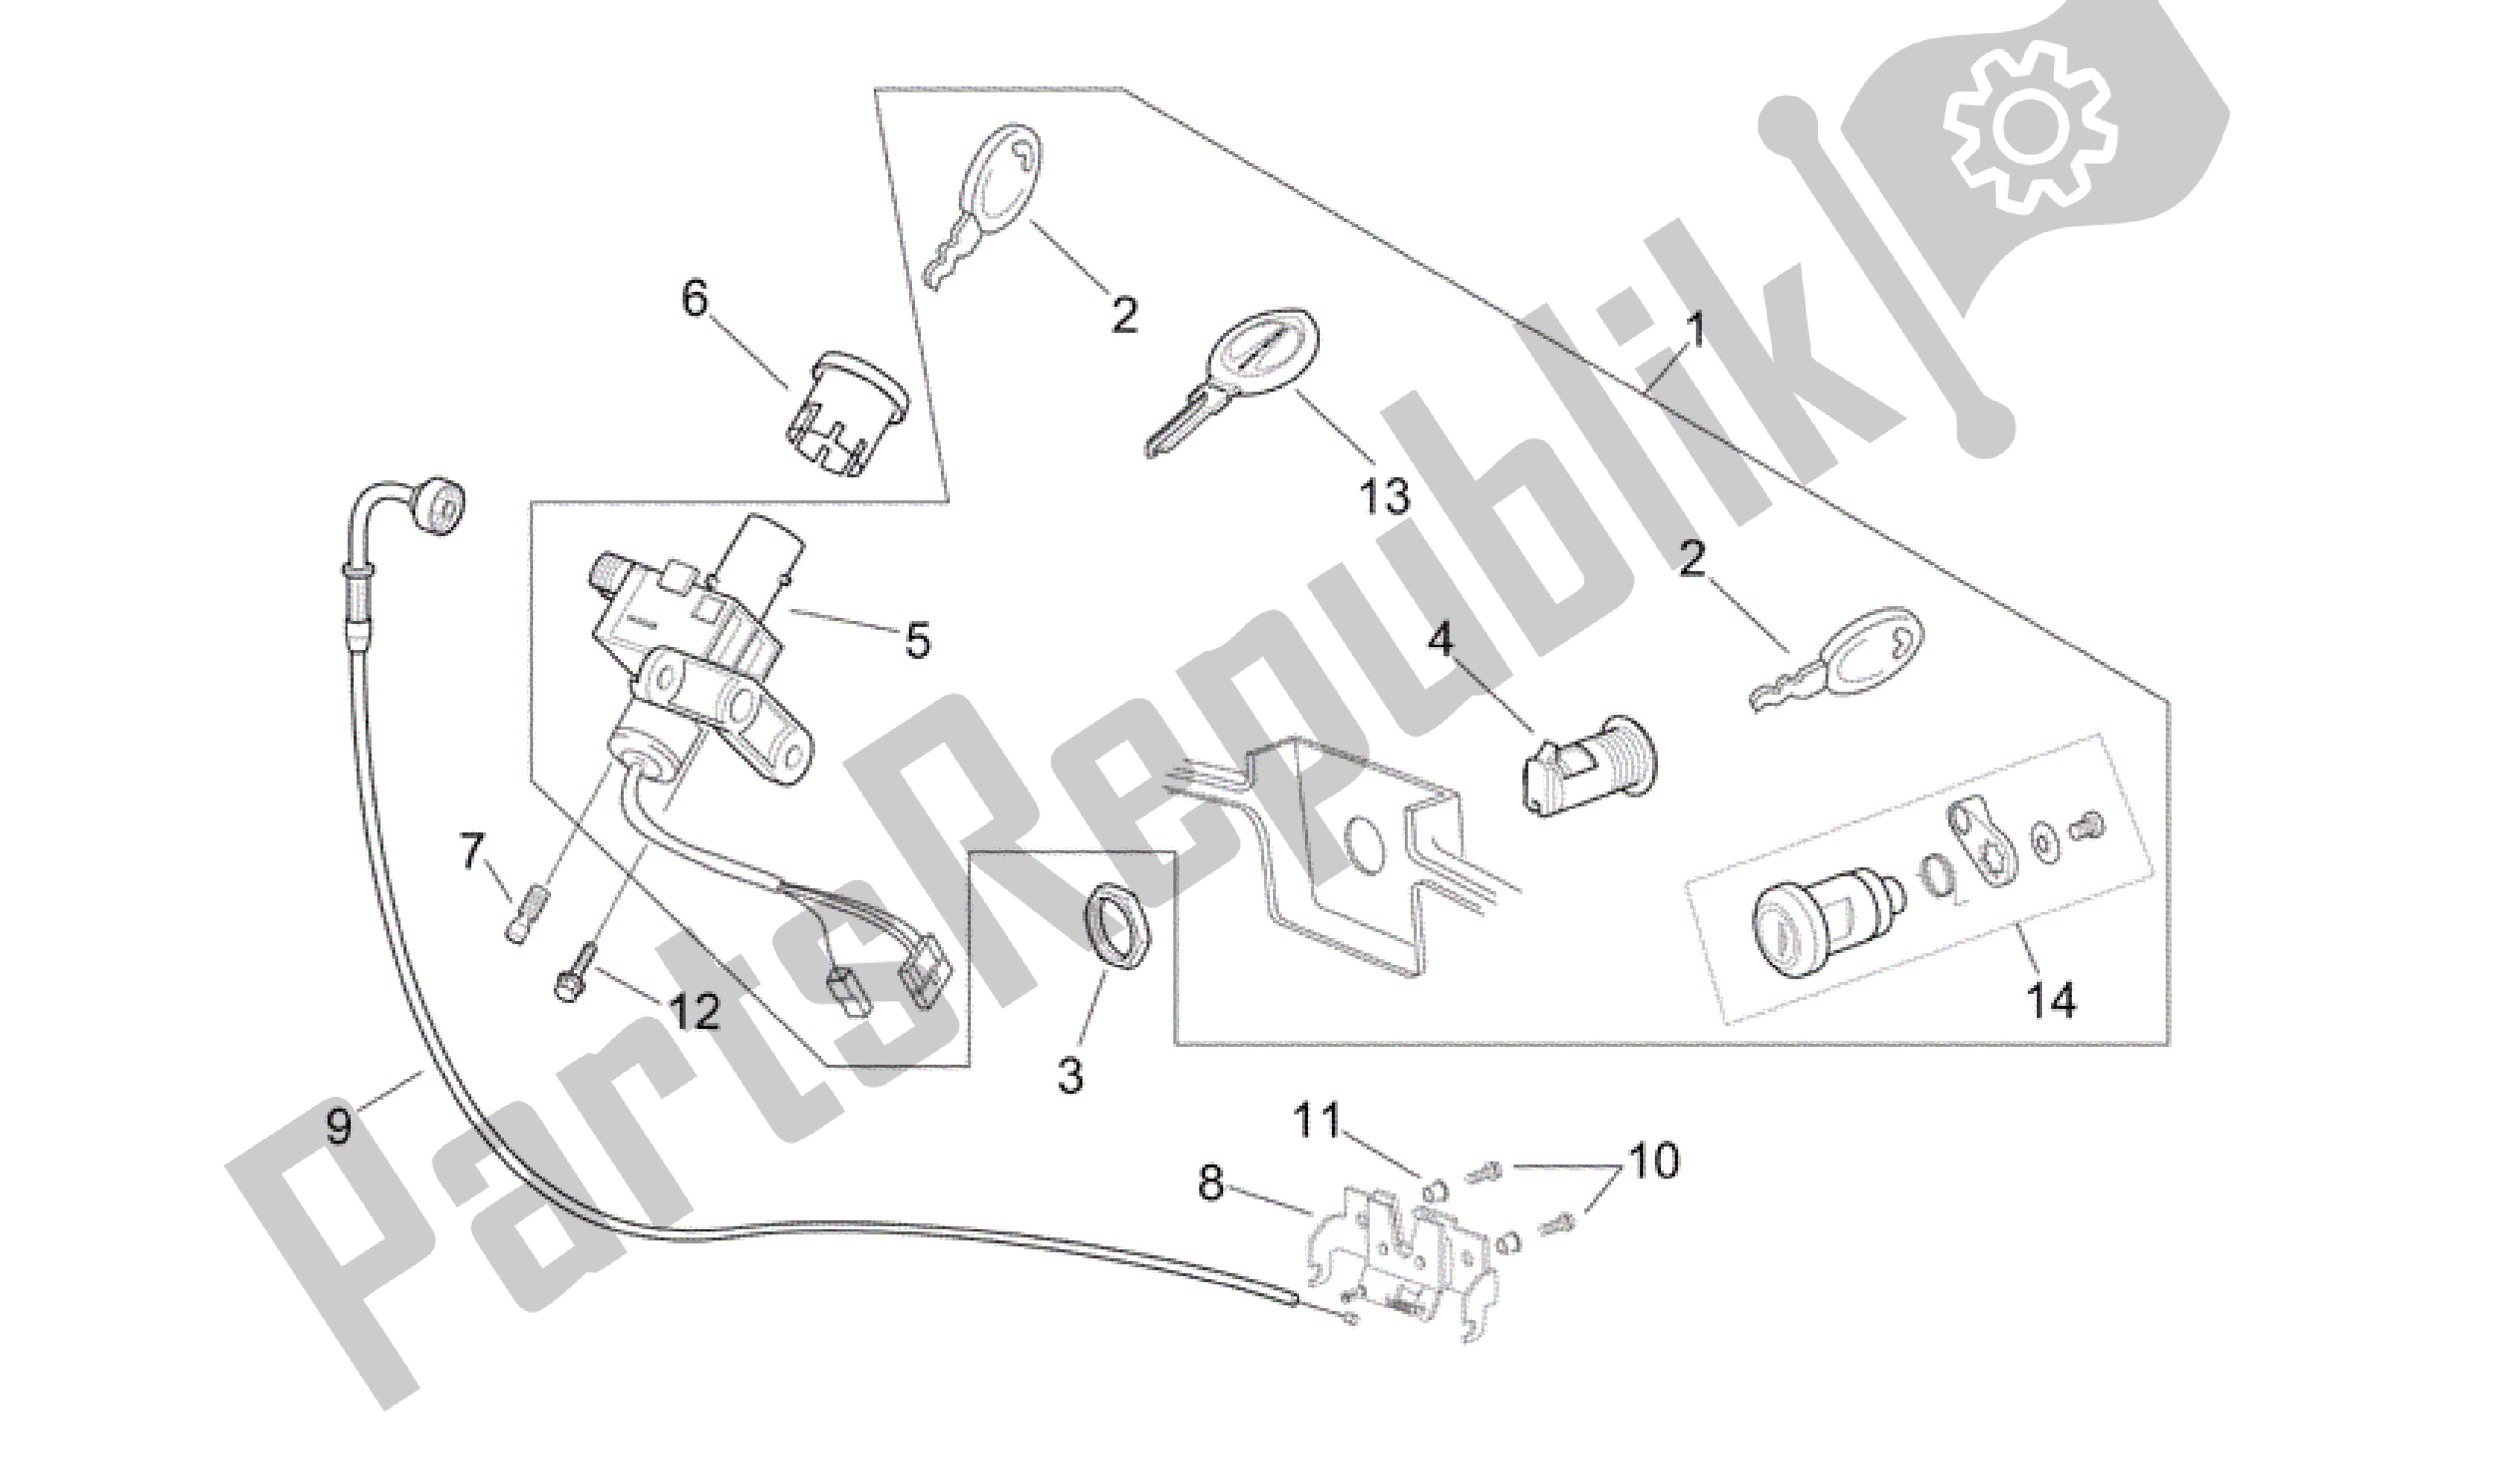 All parts for the Lock Hardware Kit of the Aprilia Scarabeo 125 2004 - 2006